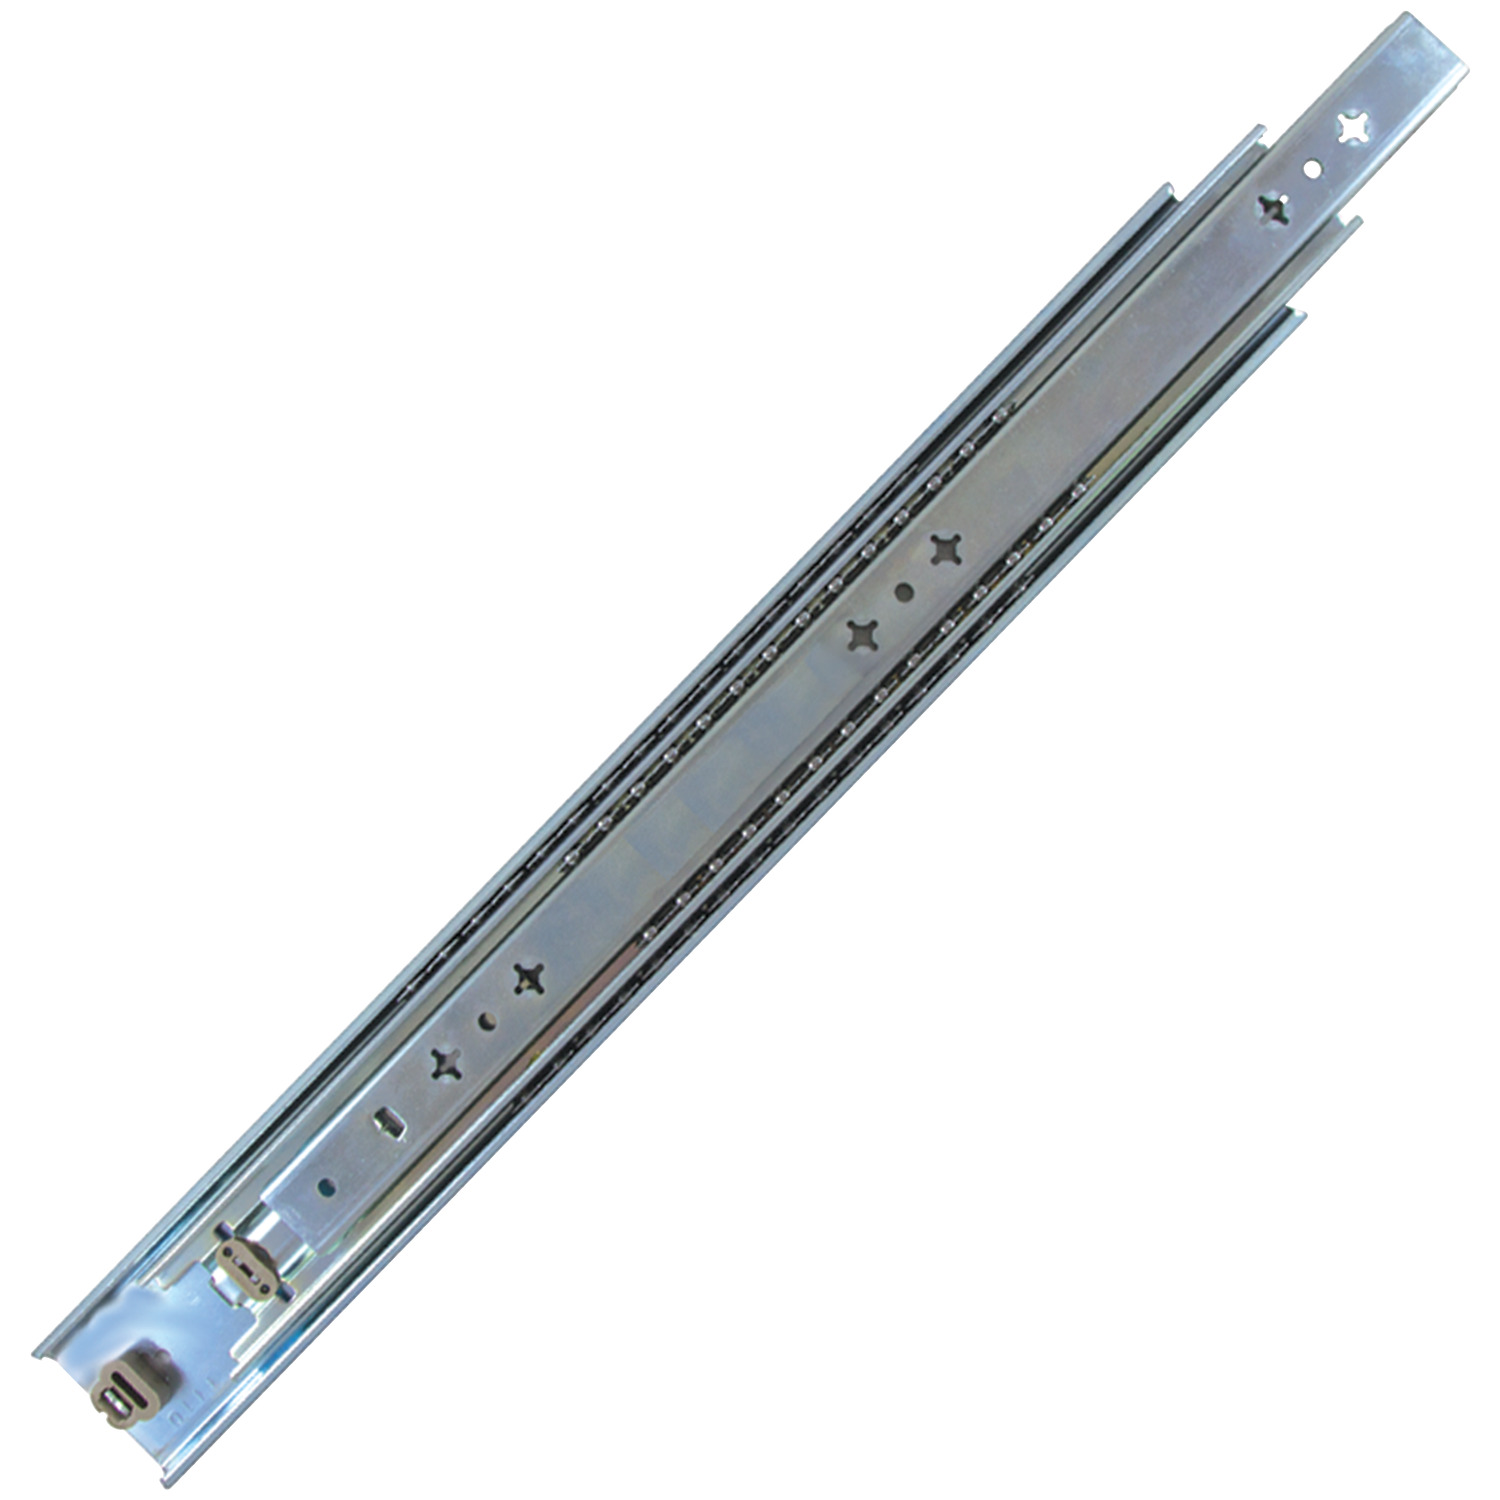 Drawer Slide - Full Extension 3 beam full extension drawer slide, supports up to 80kg. Hold-in detent when slide is closed prevents drawer from sliding open. Tested to 80,000 cycles.